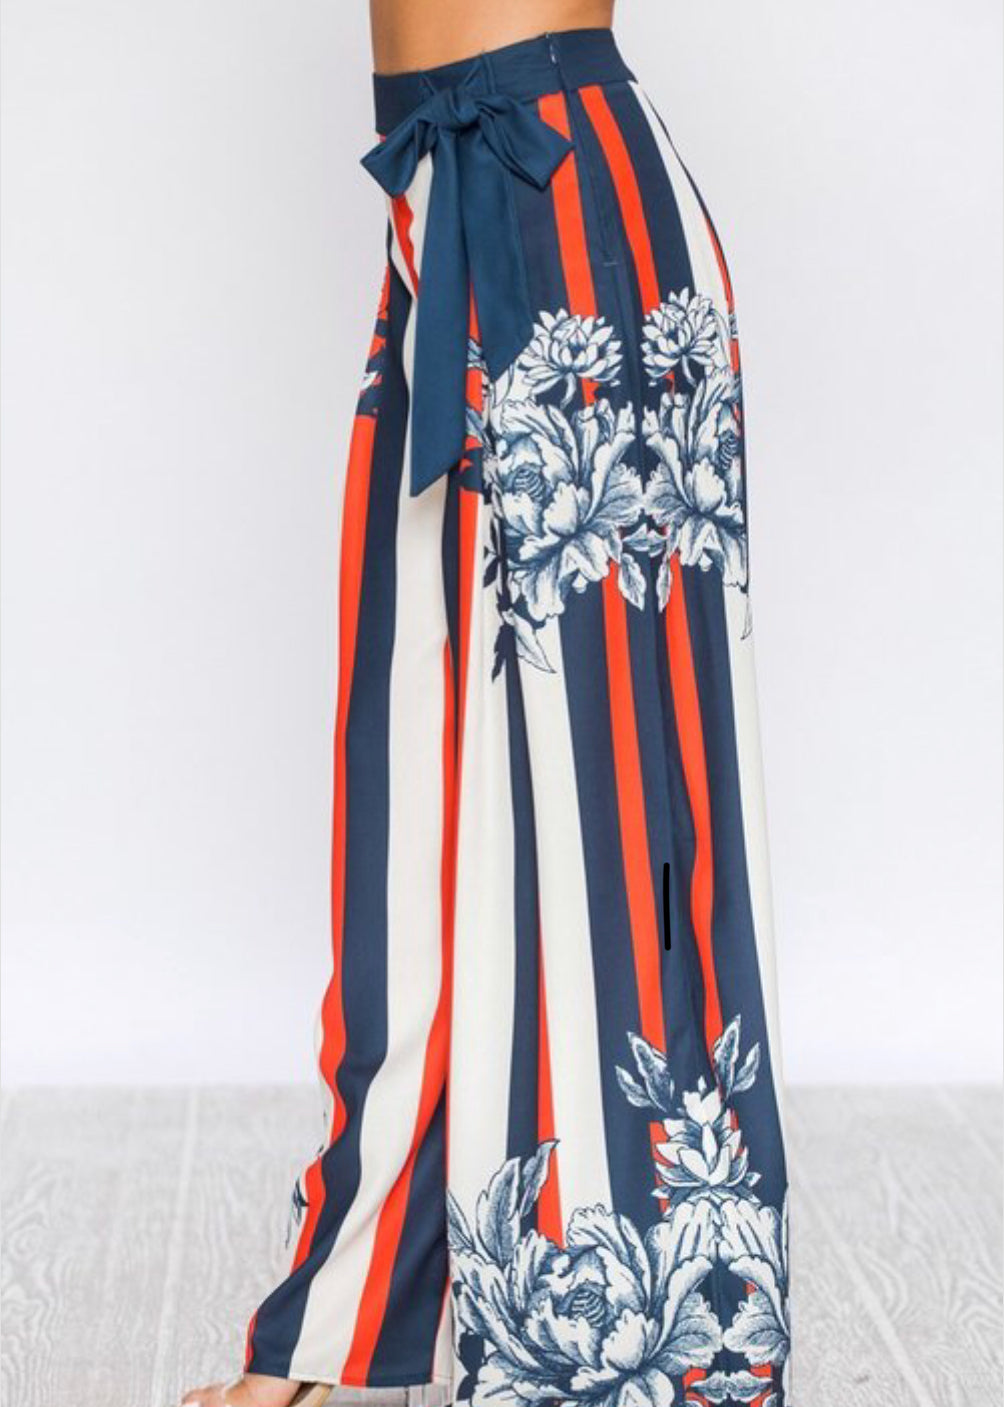 RESTOCKED! Stripped and Floral Palazzo Pant - SistahGirl